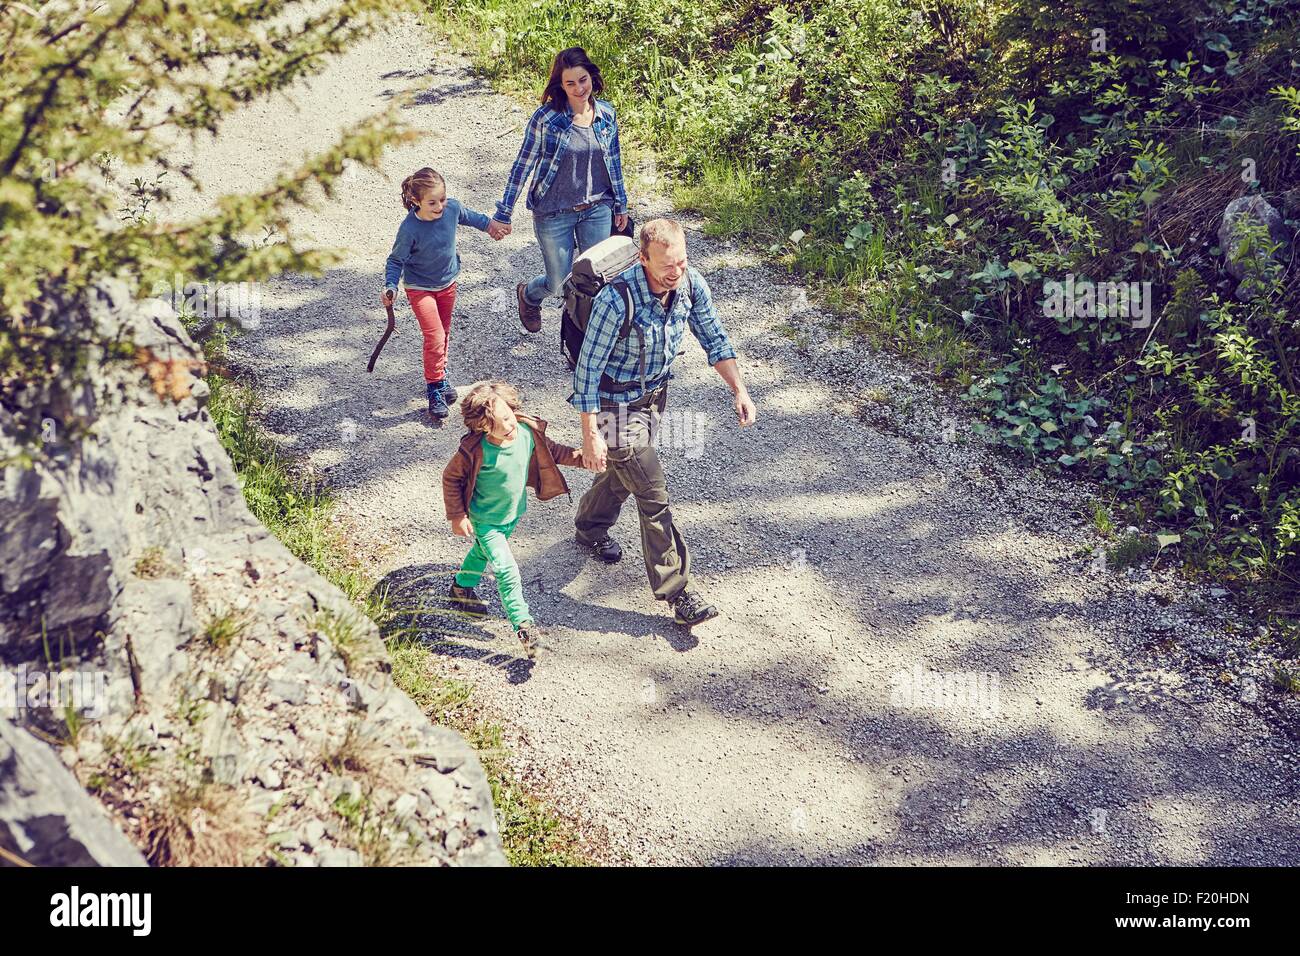 Family walking through forest, holding hands, elevated view Stock Photo